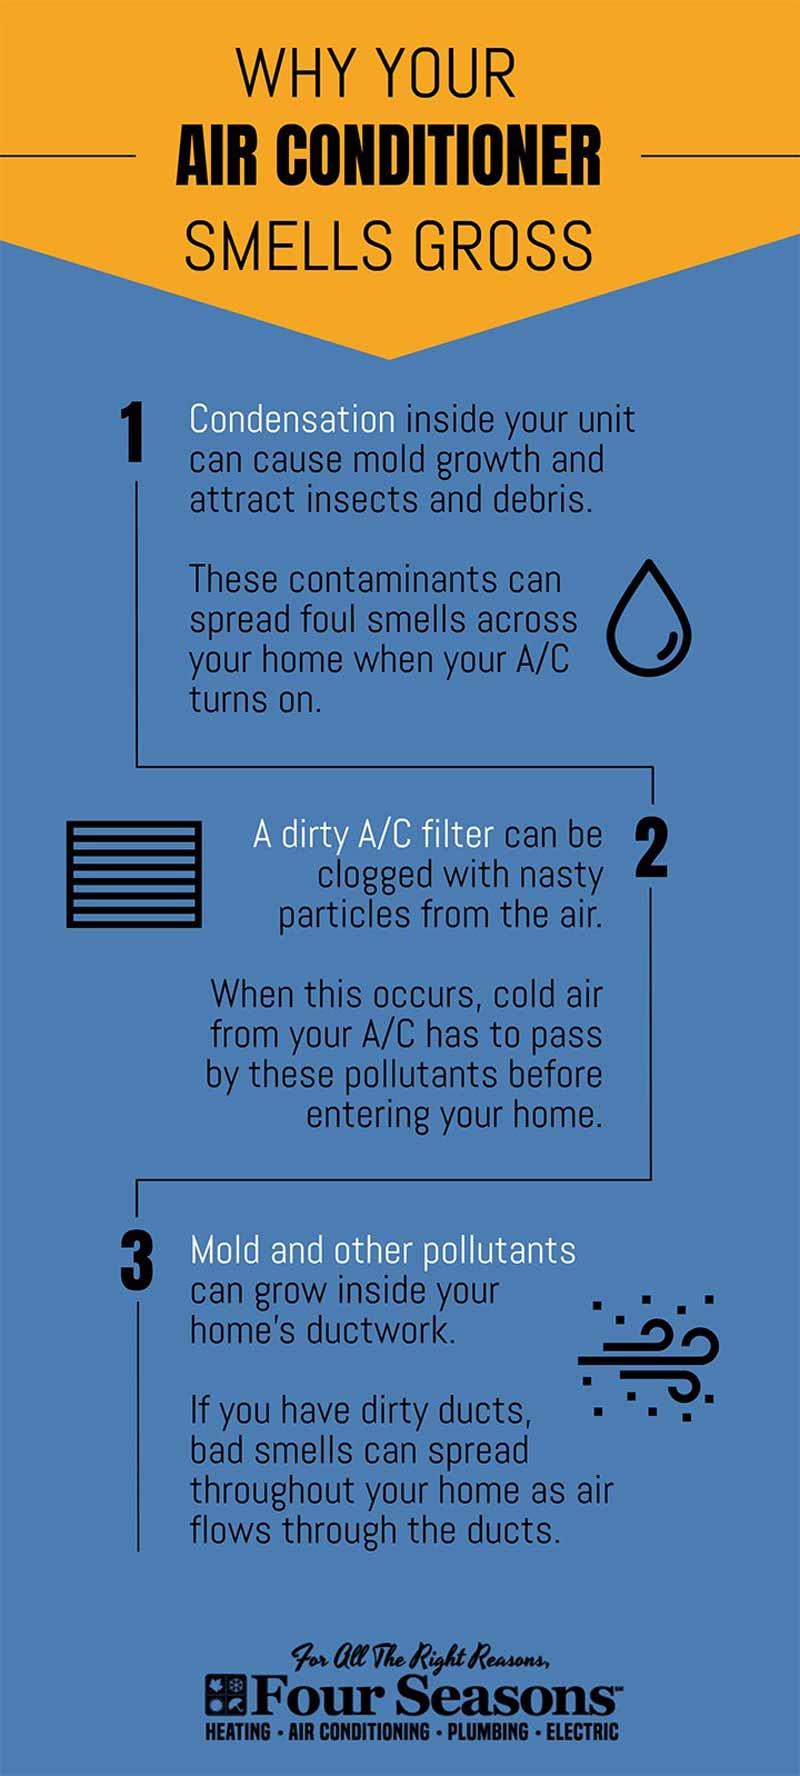 reasons for gross smell of air conditioner